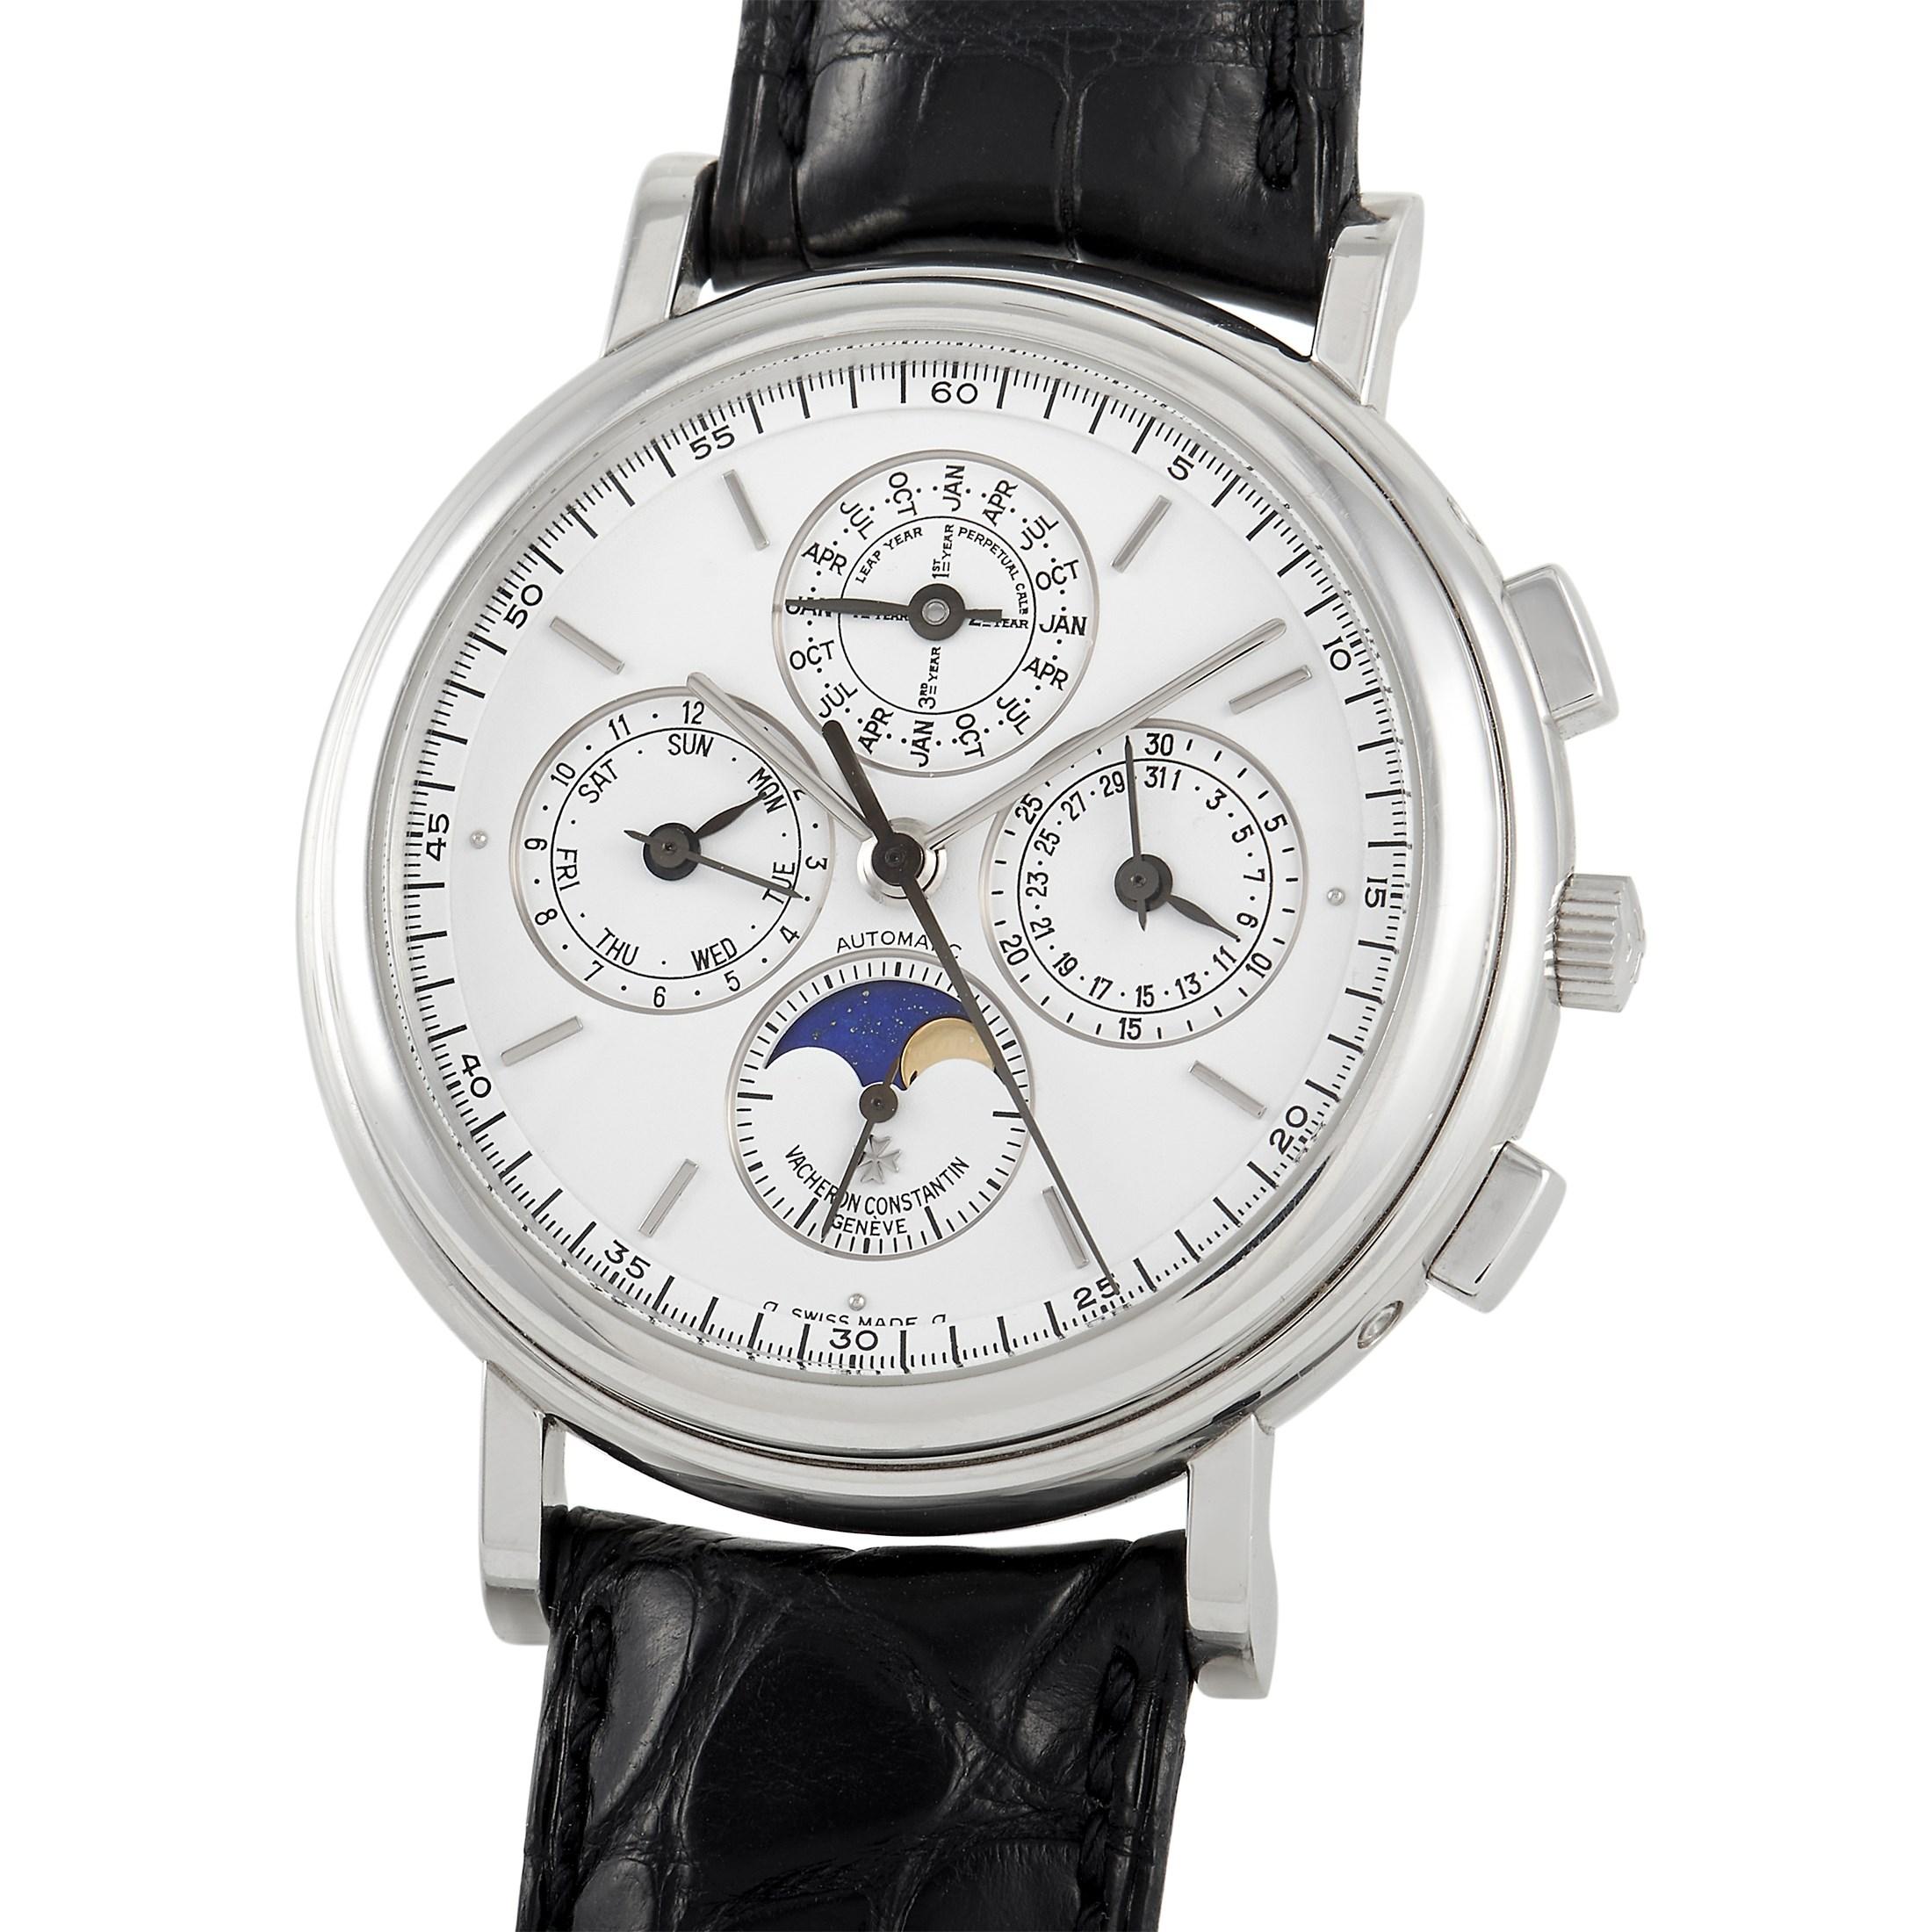 Unveiled in 1992, the Patrimony Platinum Watch 49005/000P is the first perpetual calendar chronograph introduced by Vacheron Constantin. It features a 38mm round case in platinum with a stepped bezel, a solid back secured by 8 screws, a white dial,